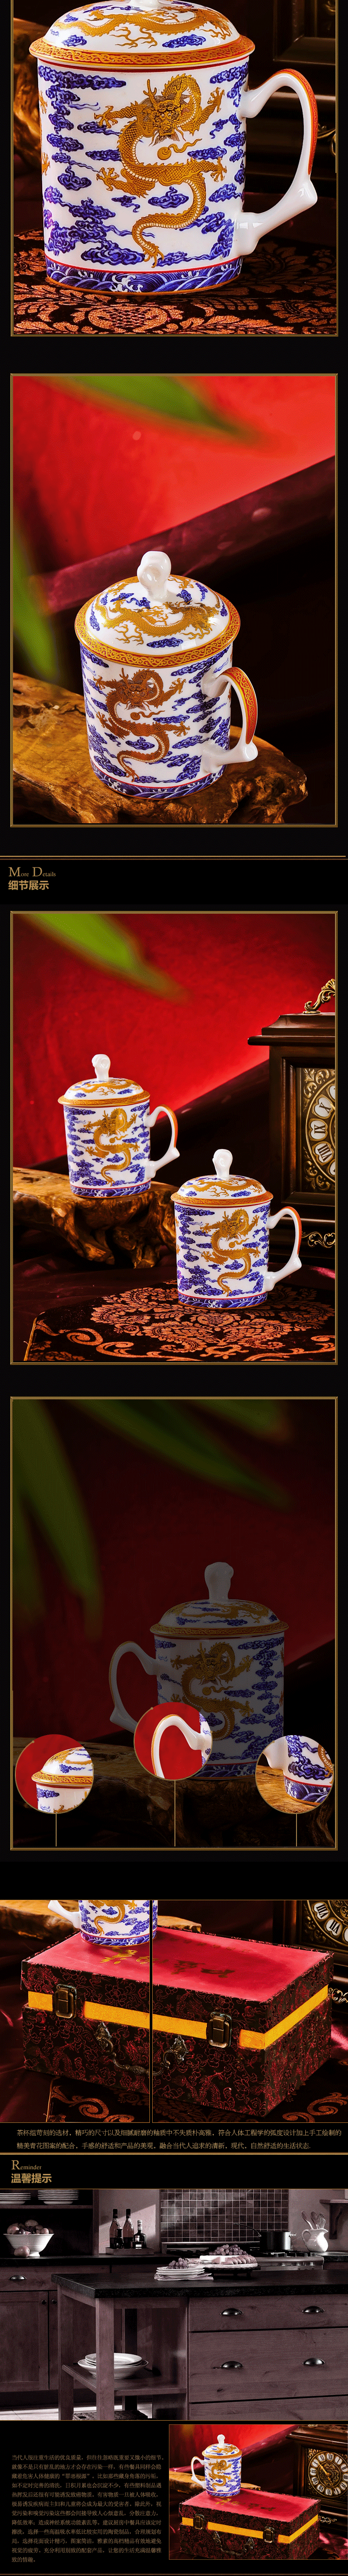 Red xin jingdezhen premium office large ceramic tea cup palace imperial collection principal dragon cup